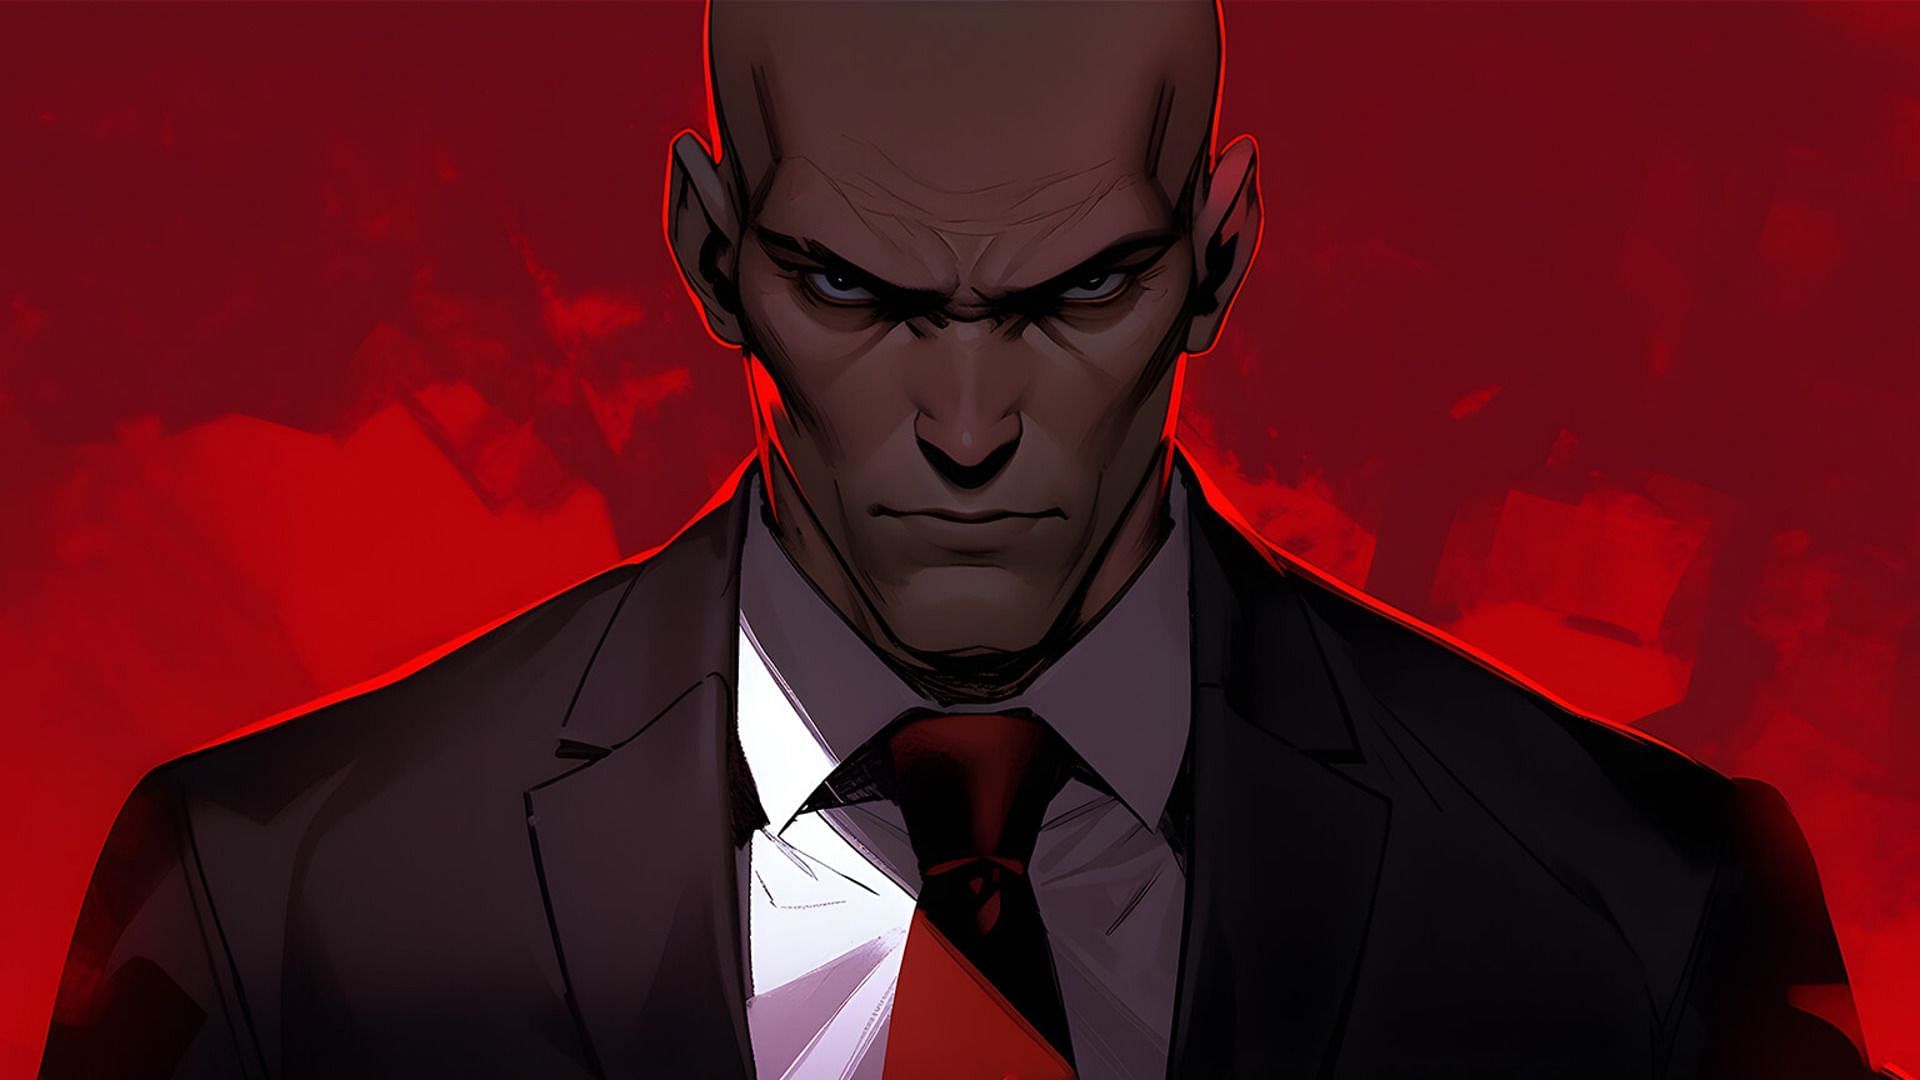 Agent 47 is here (Image via Feral/ IO Interactive)